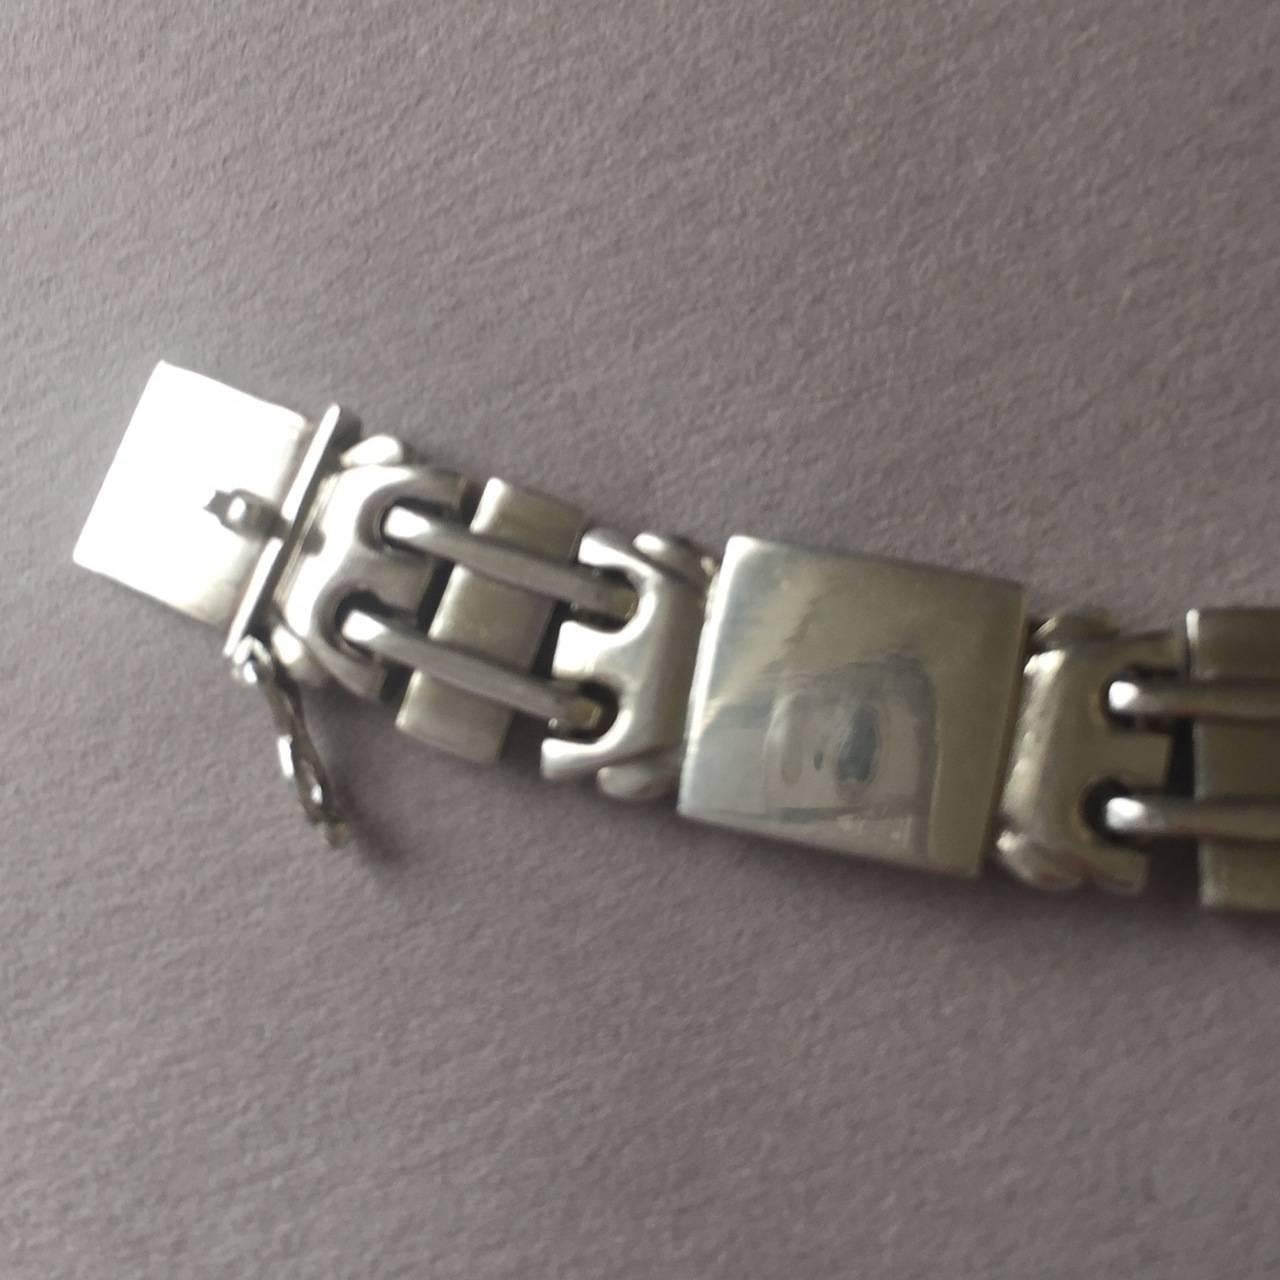 Georg Jensen Art Deco Sterling Silver Bracelet by Oscar Gundlach-Pedersen, No. 48.  

Intricately detailed bracelet that is hard to find. Excellent condition with gorgeous patina.

We have the matching necklace in stock.

Dimensions: 7.25